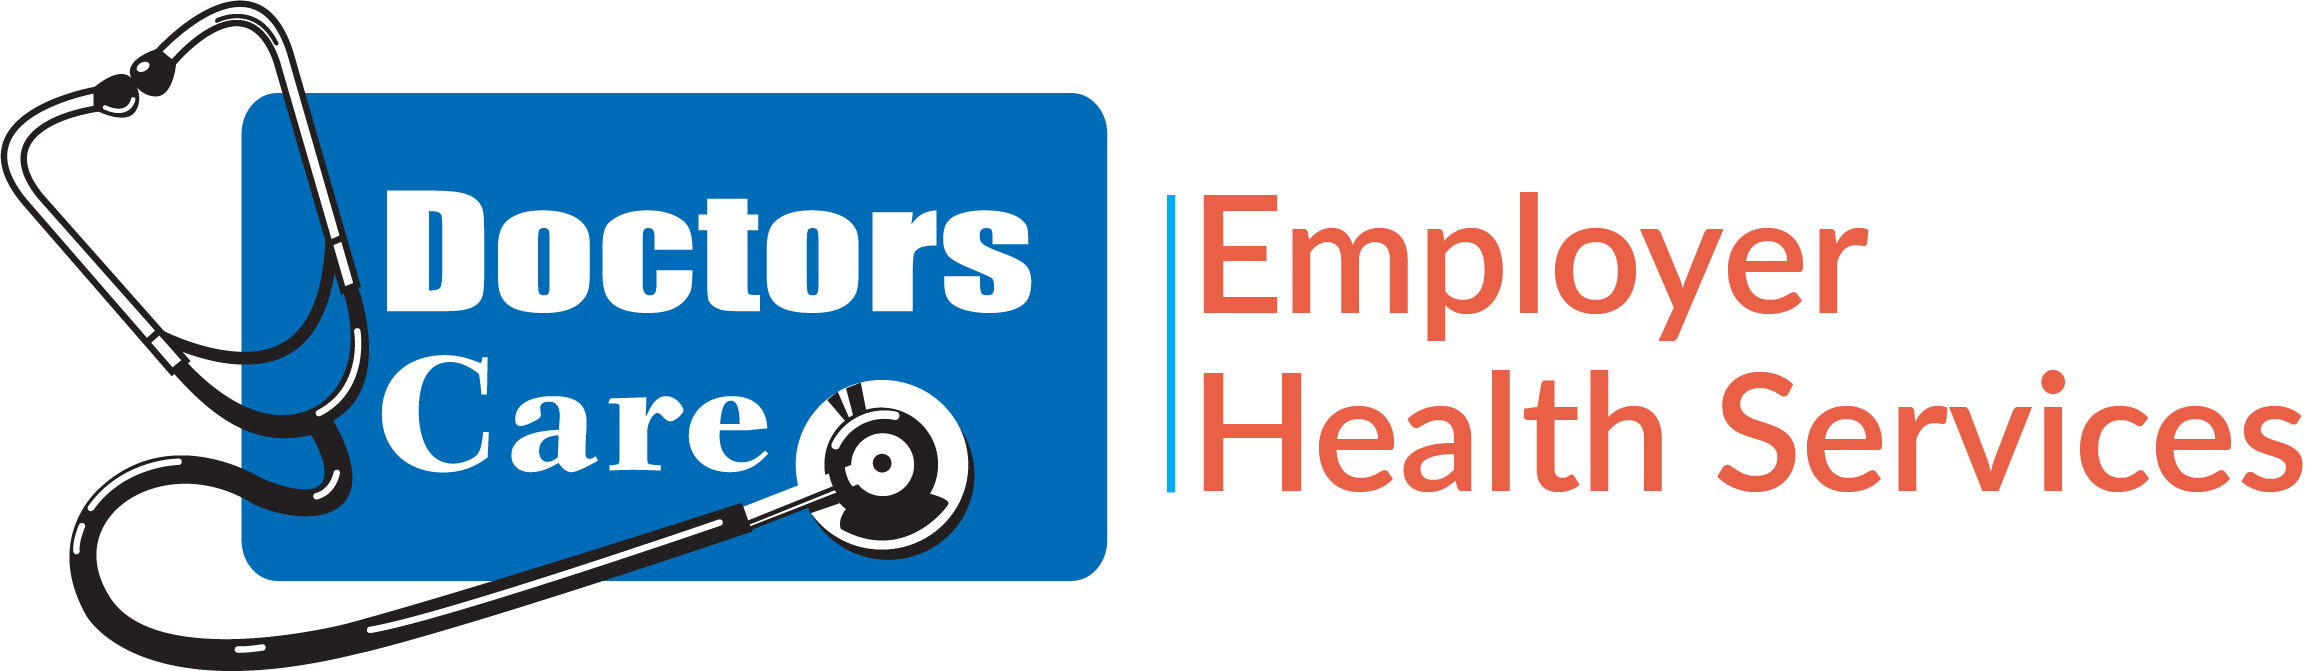 Doctors Care - Employer Health Services